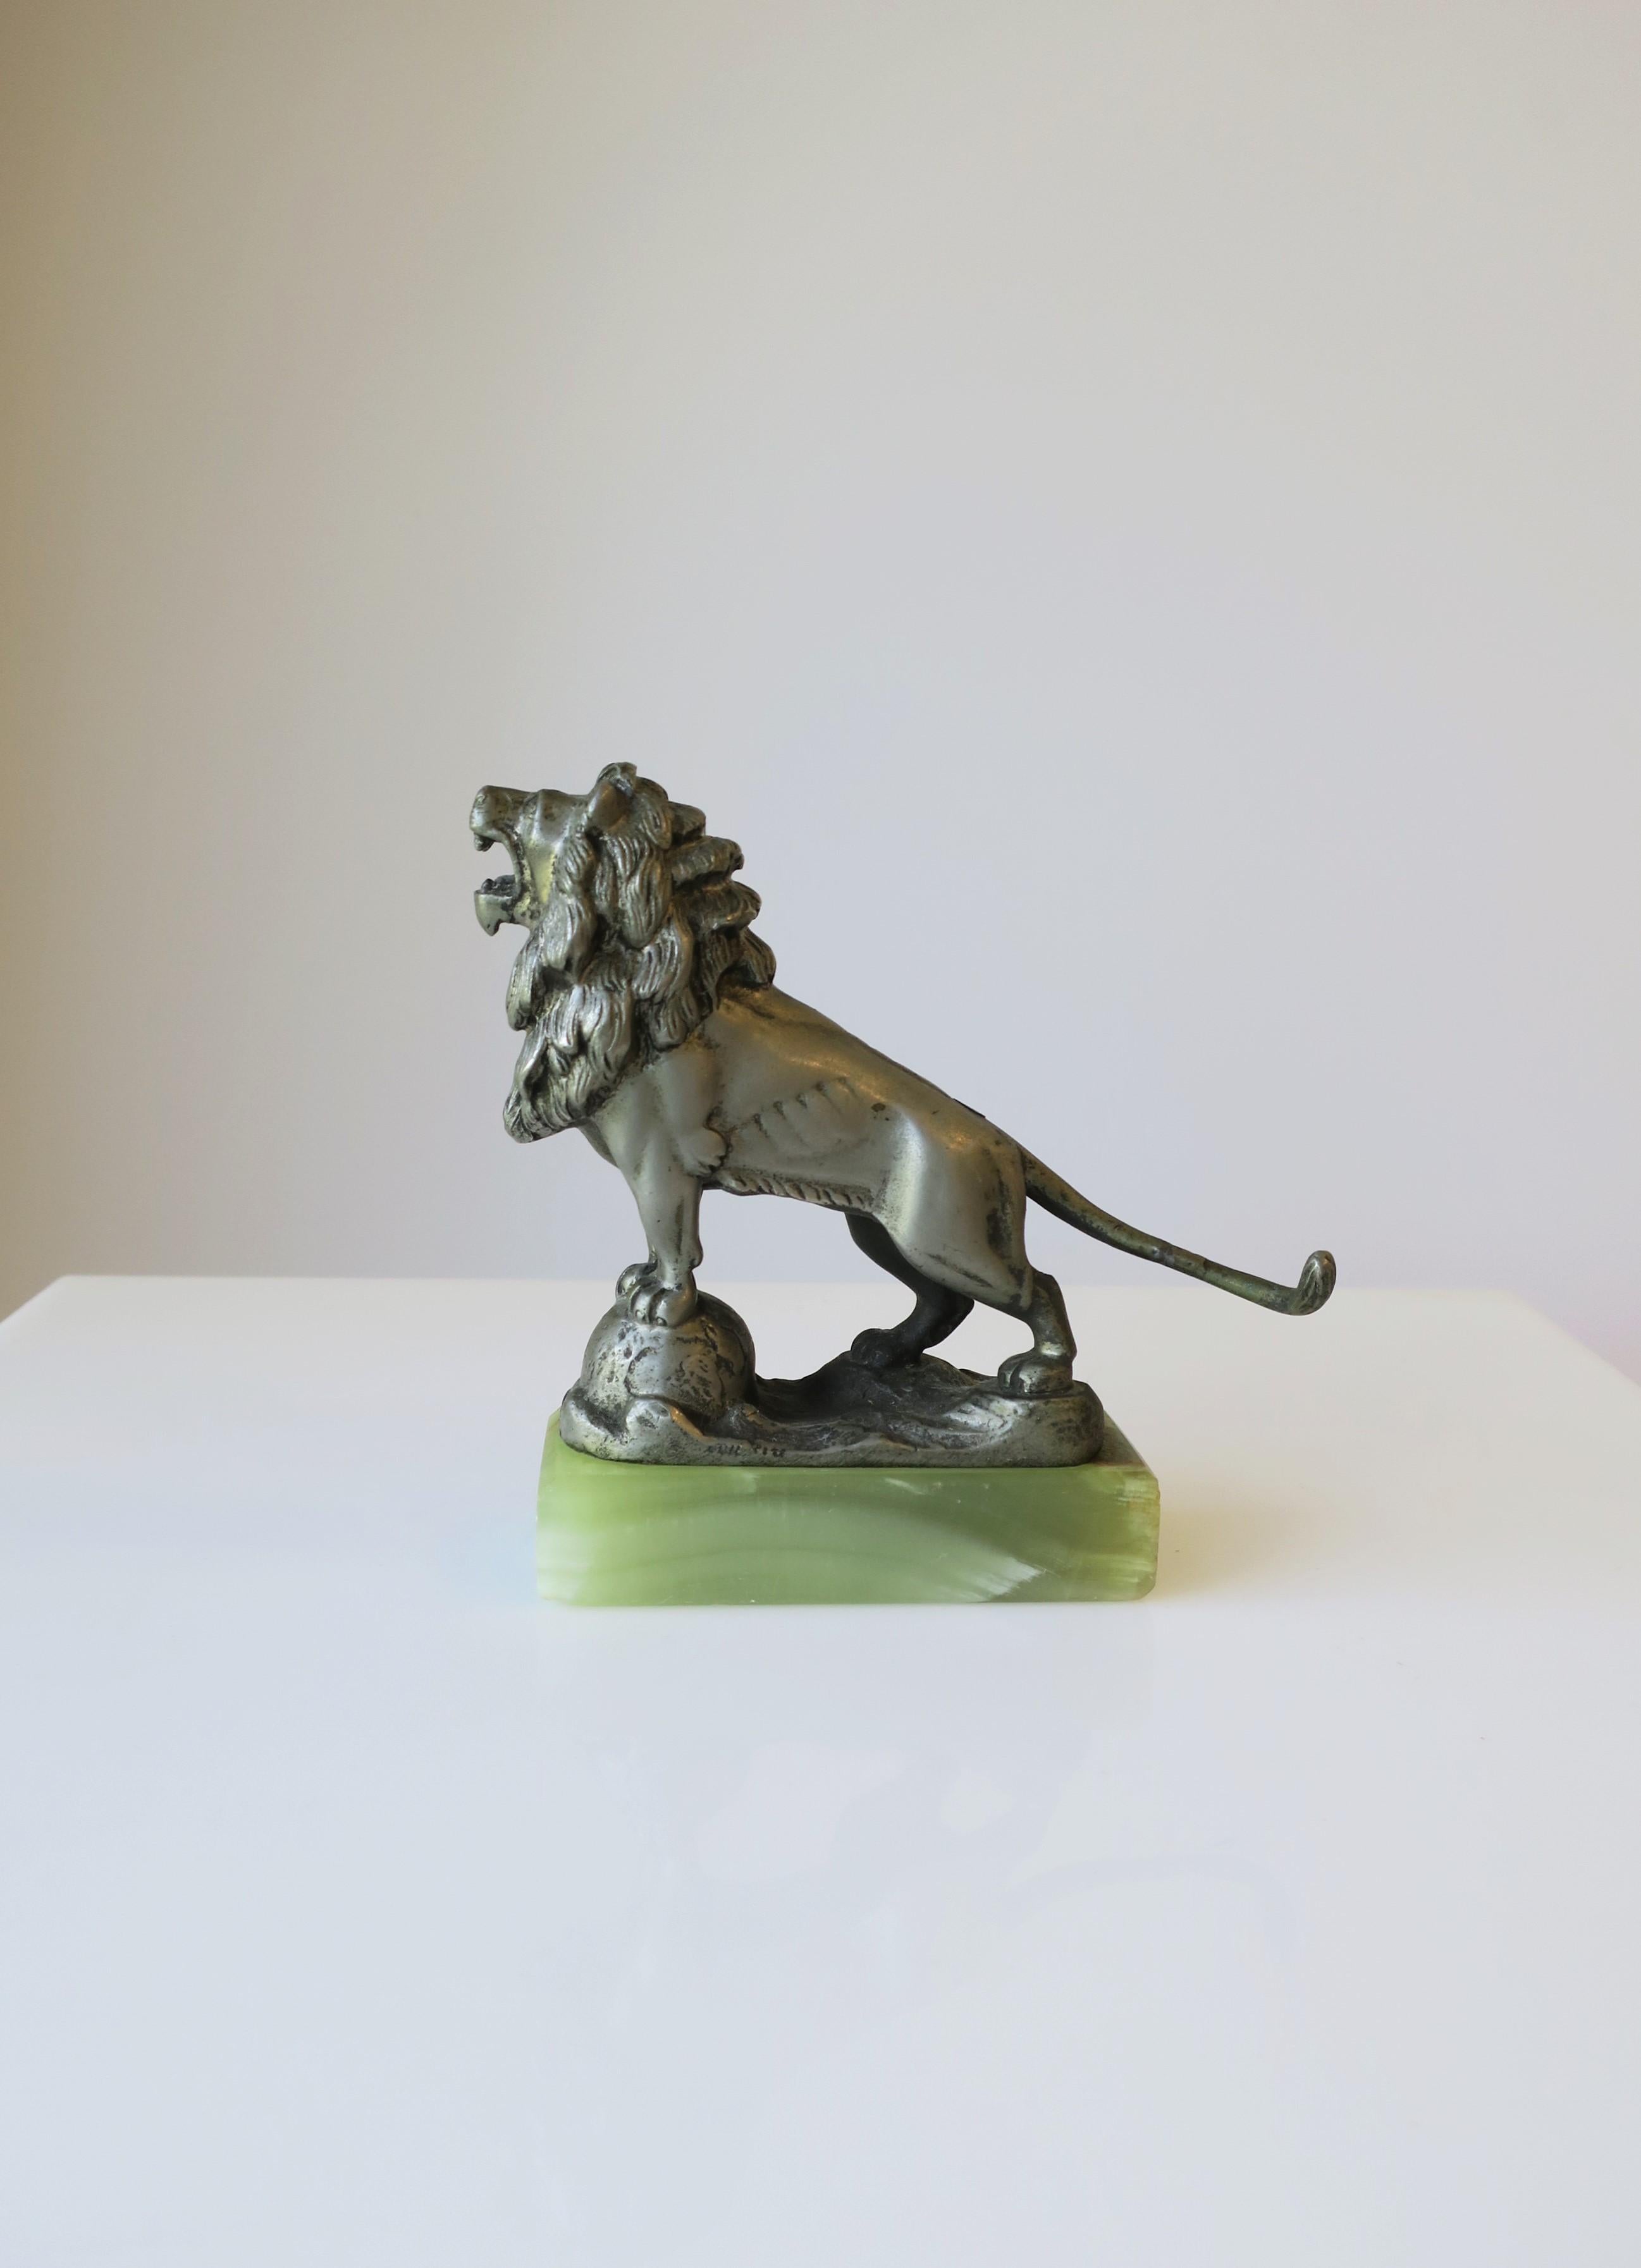 A small but substantial Grand Tour Medici silvered bronze growling lion atop world globe sphere on a green onyx marble base, circa mid-20th century. A great decorative object for a desk, office, library, etc. Dimensions: 1.75